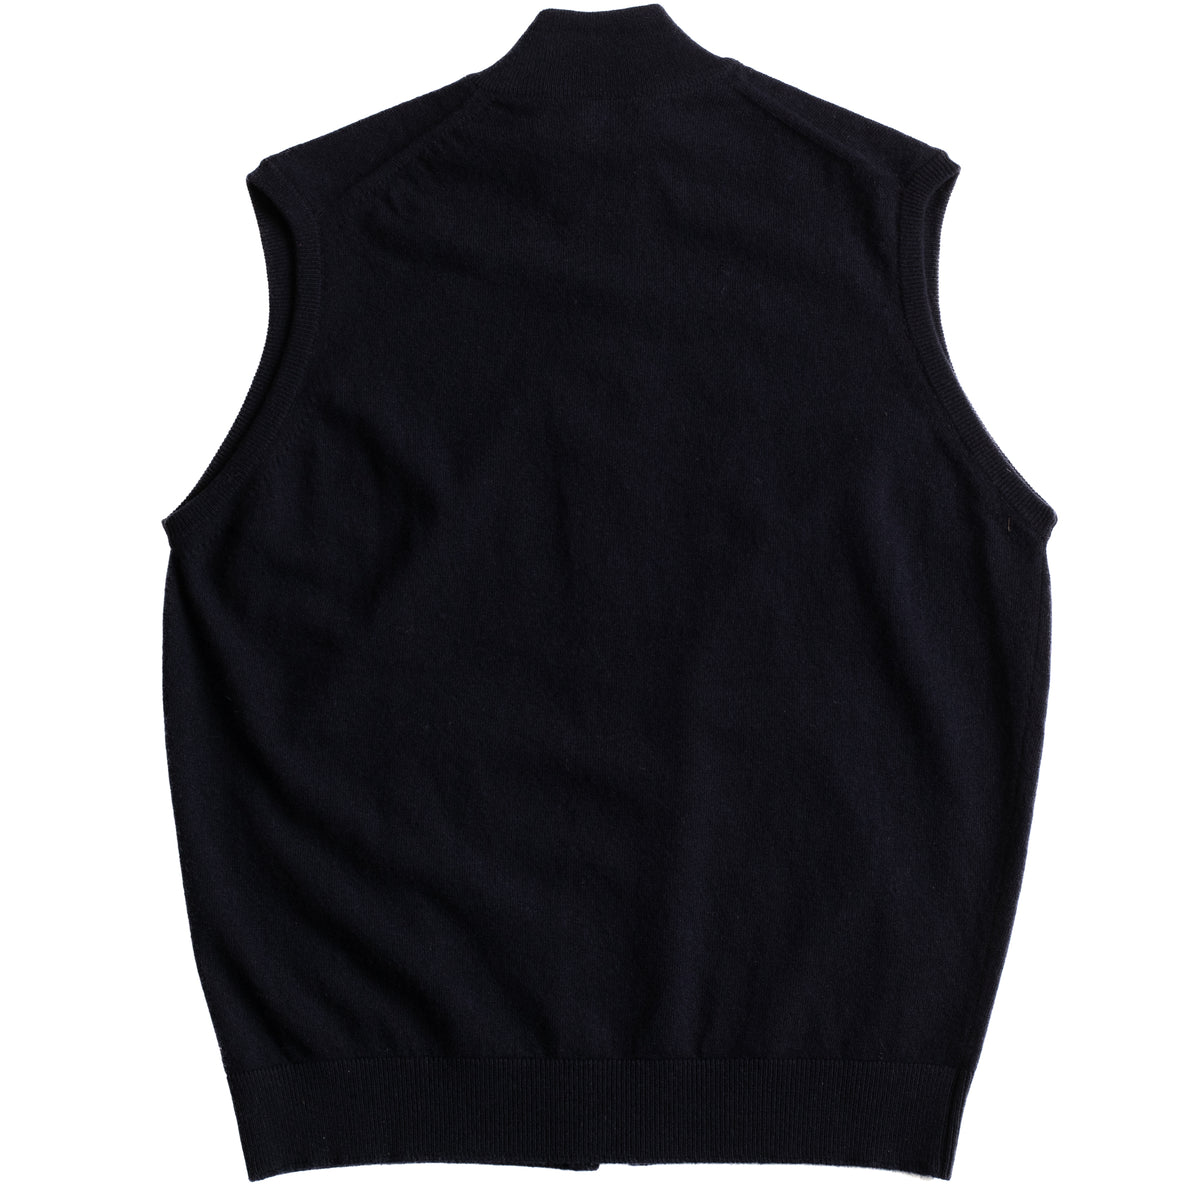 Navy Geelong Knitted Gilet